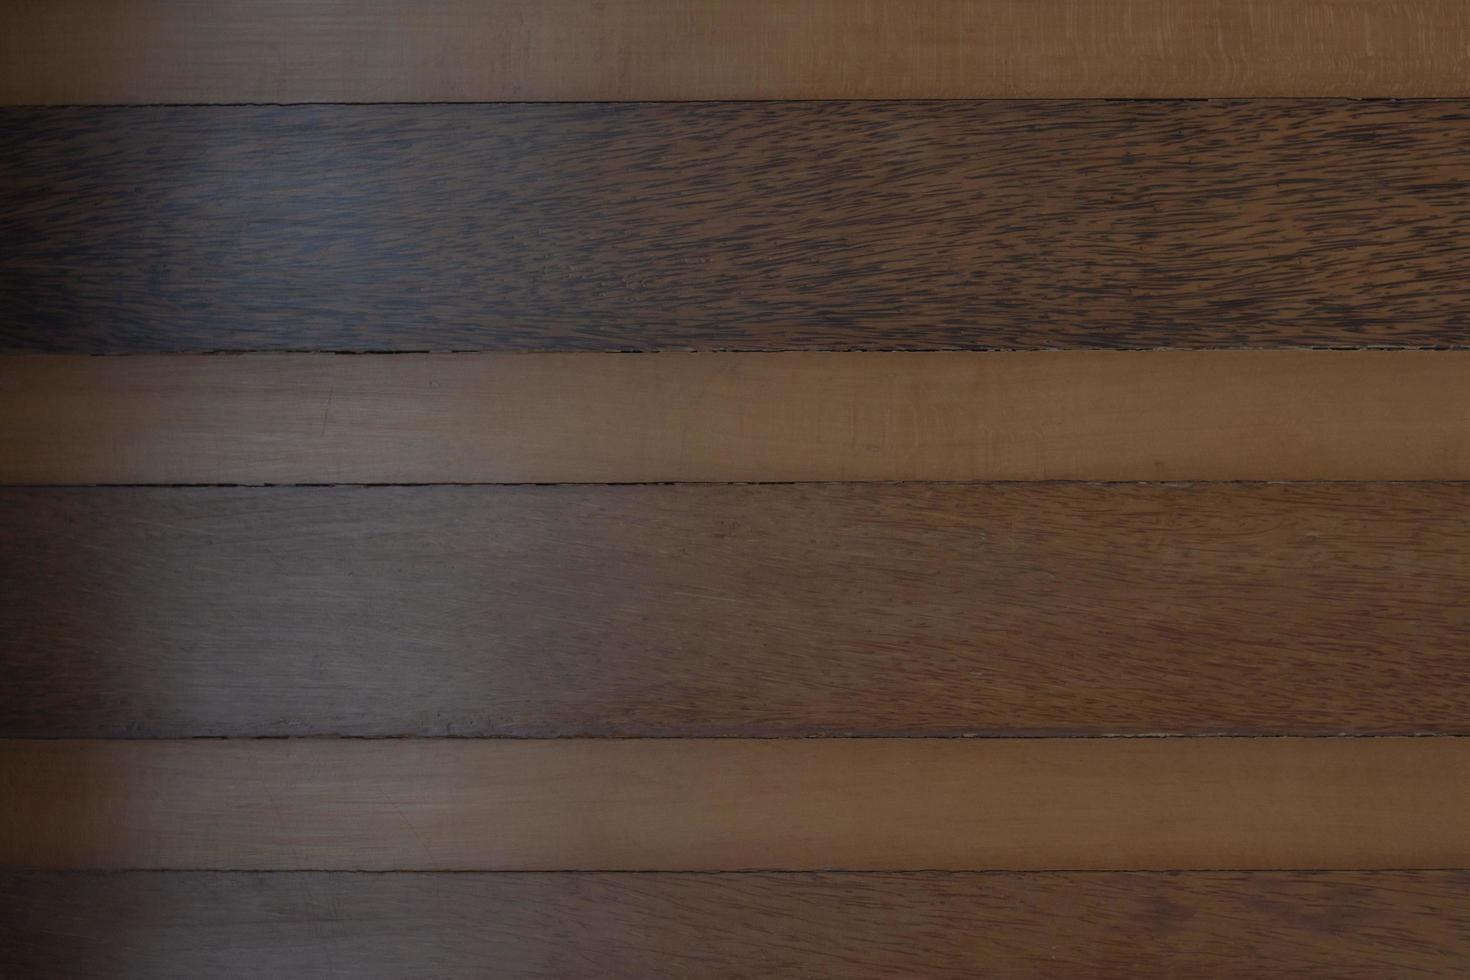 Textured of PVC sheet look like wood pattern they are arranged horizontally for background applications. photo